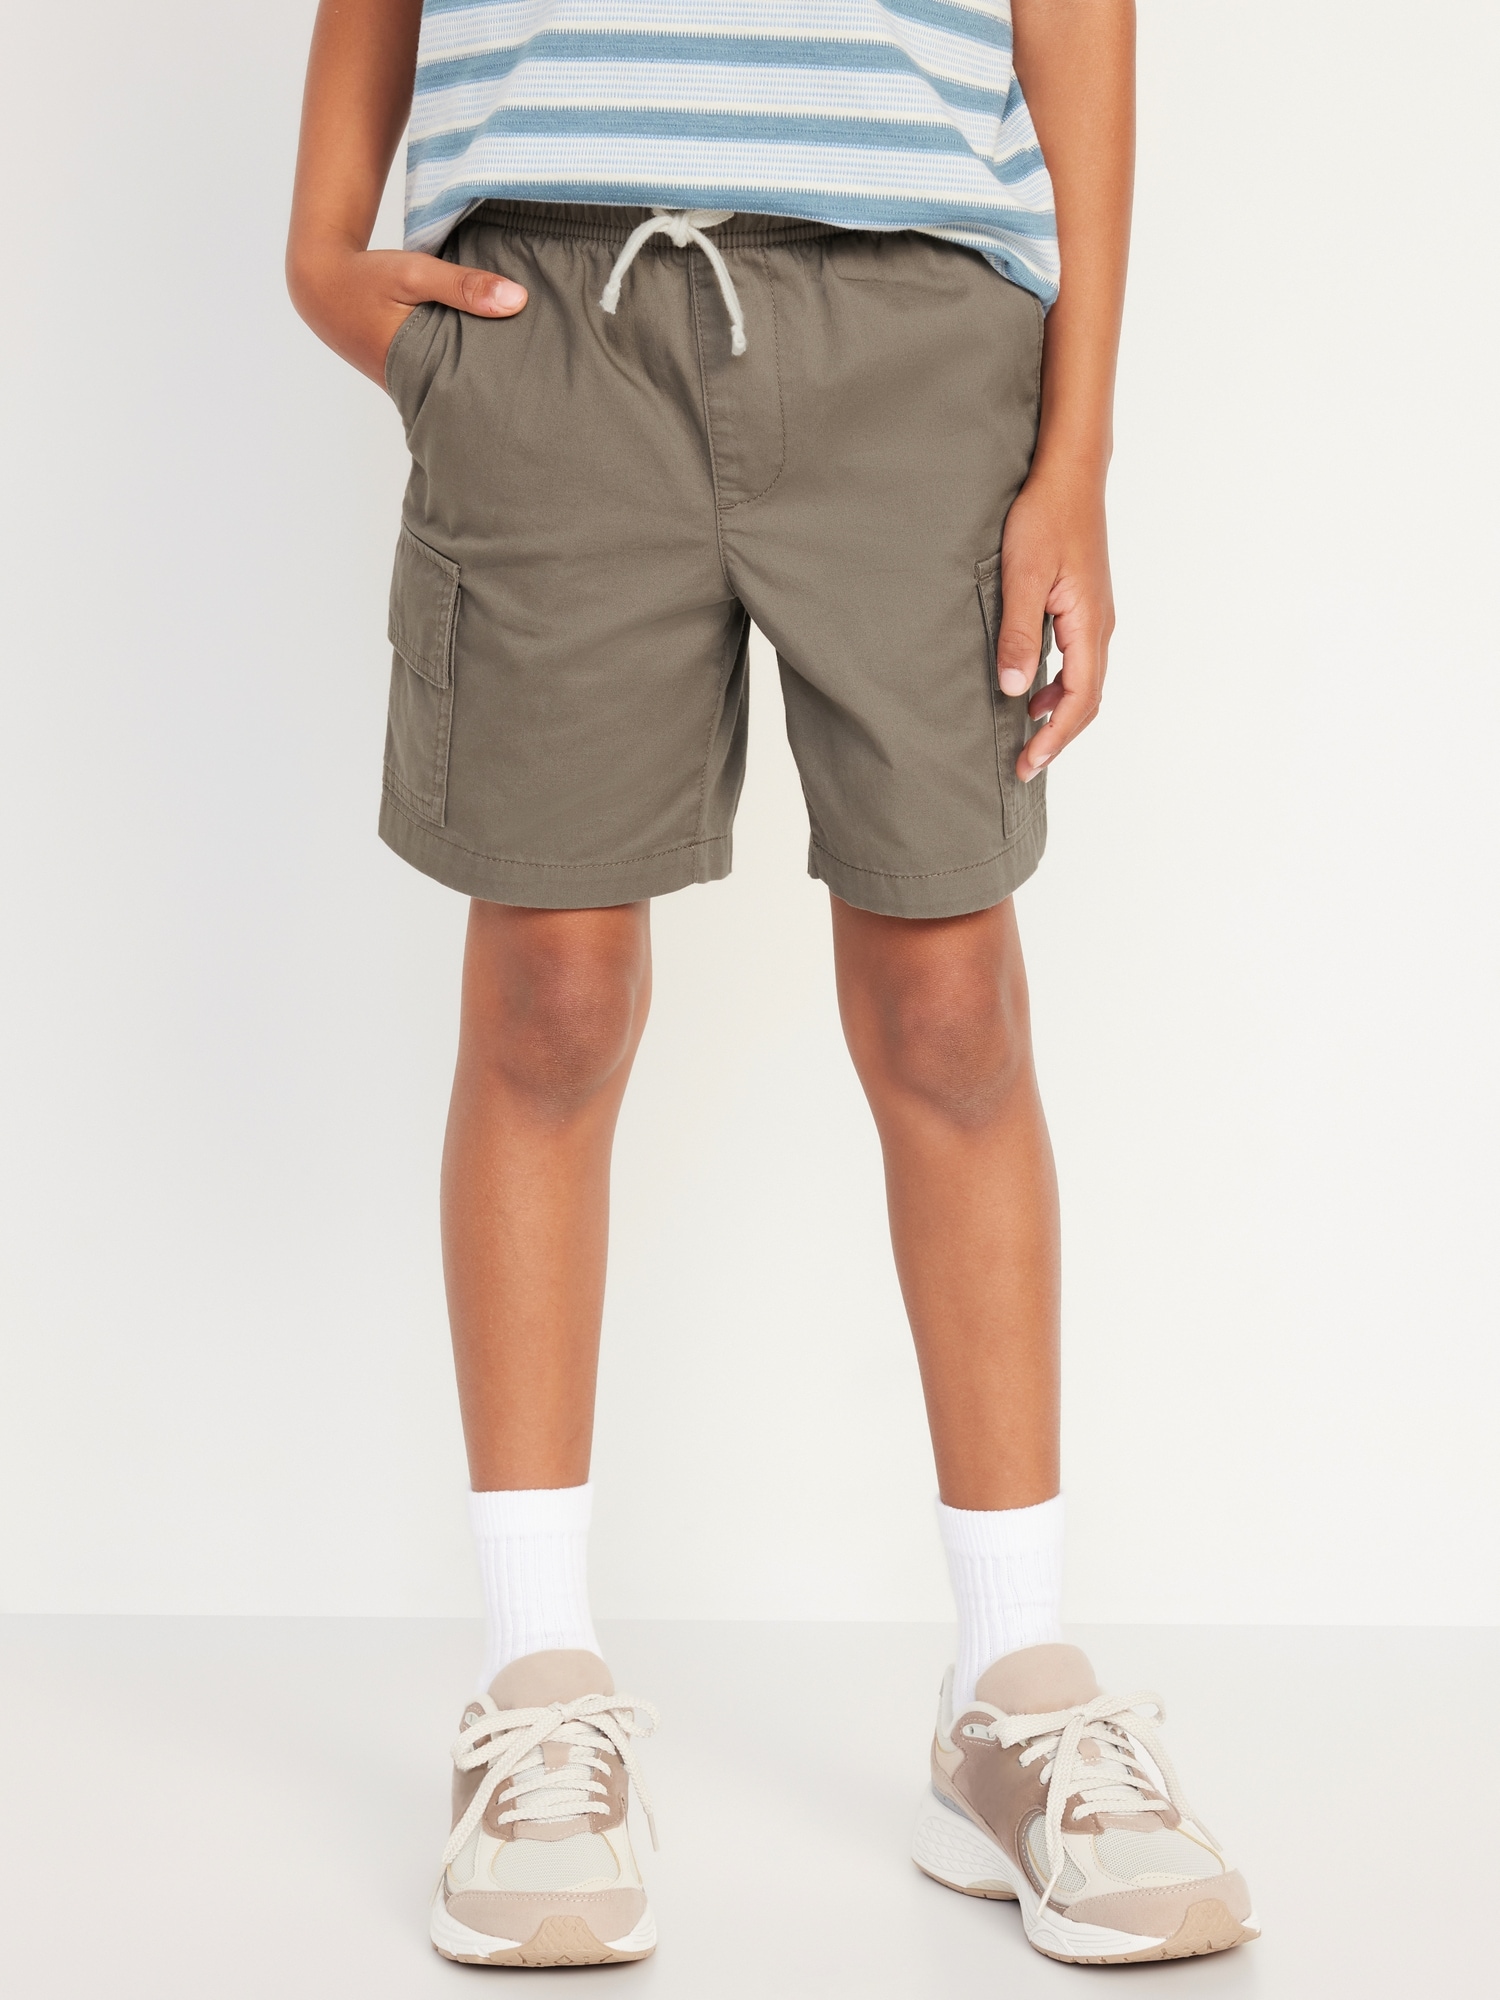 Cargo Jogger Shorts for Boys (Above Knee) Hot Deal